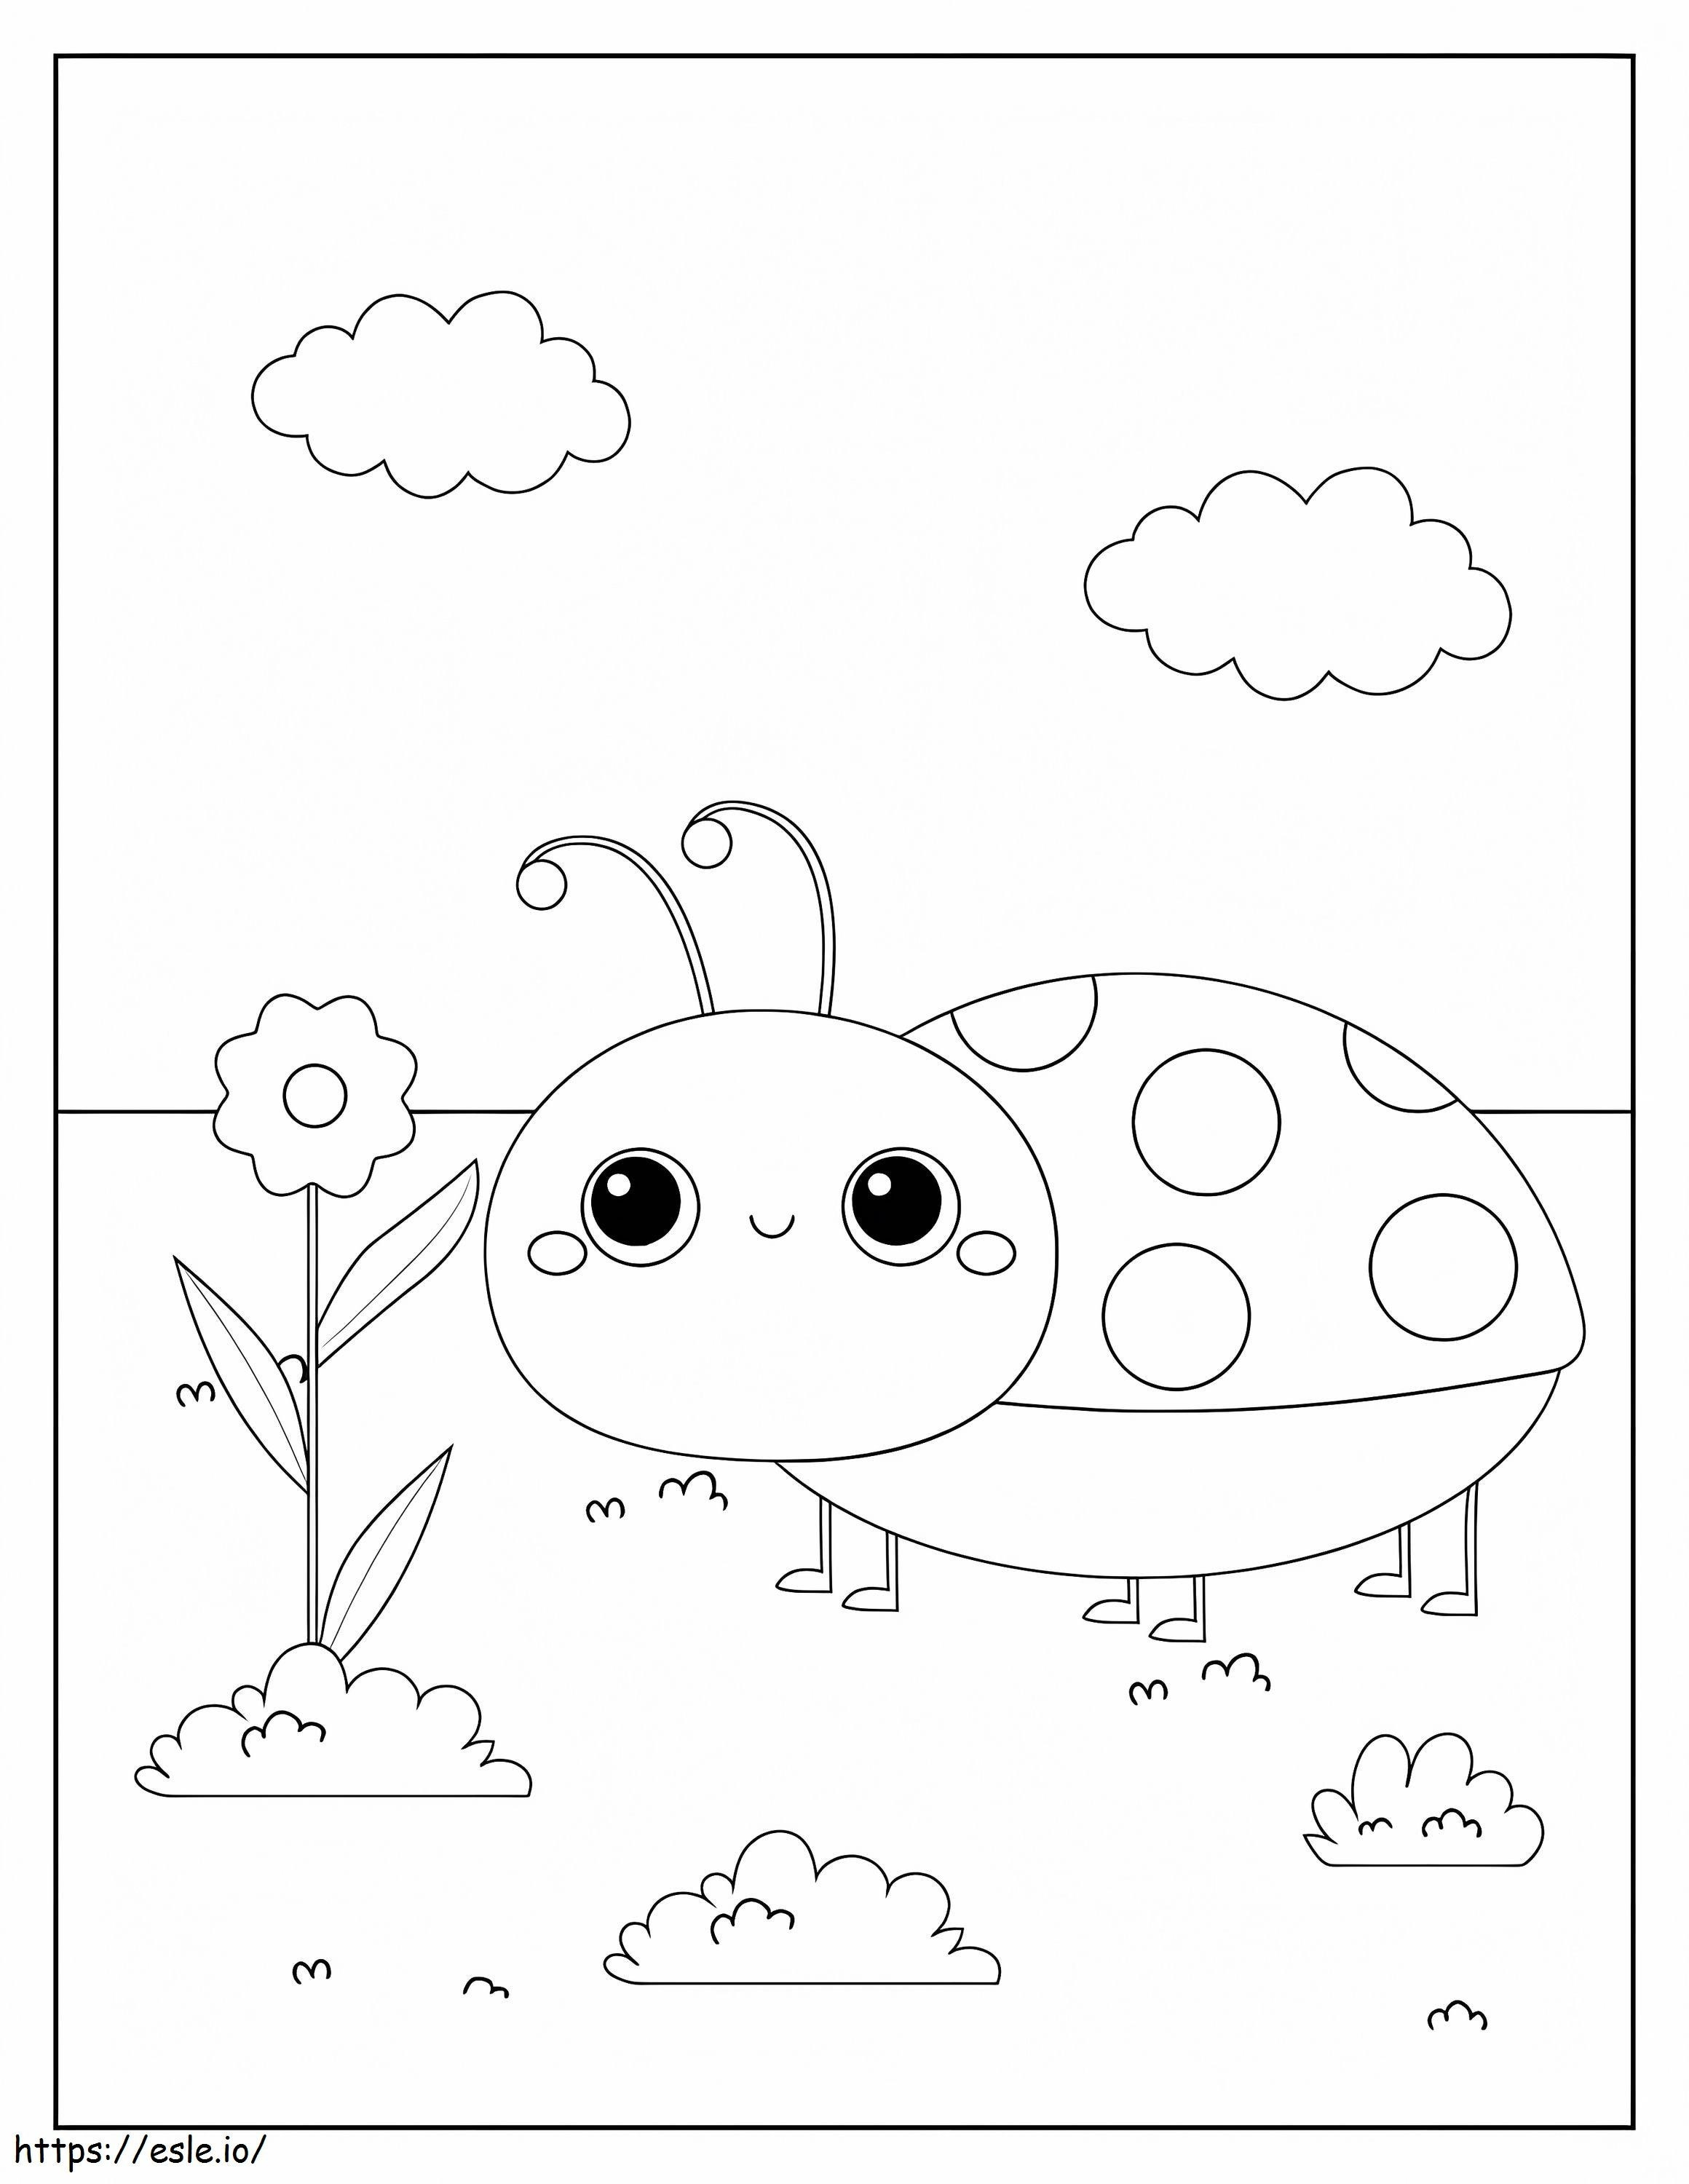 The Most Adorable Ladybug coloring page